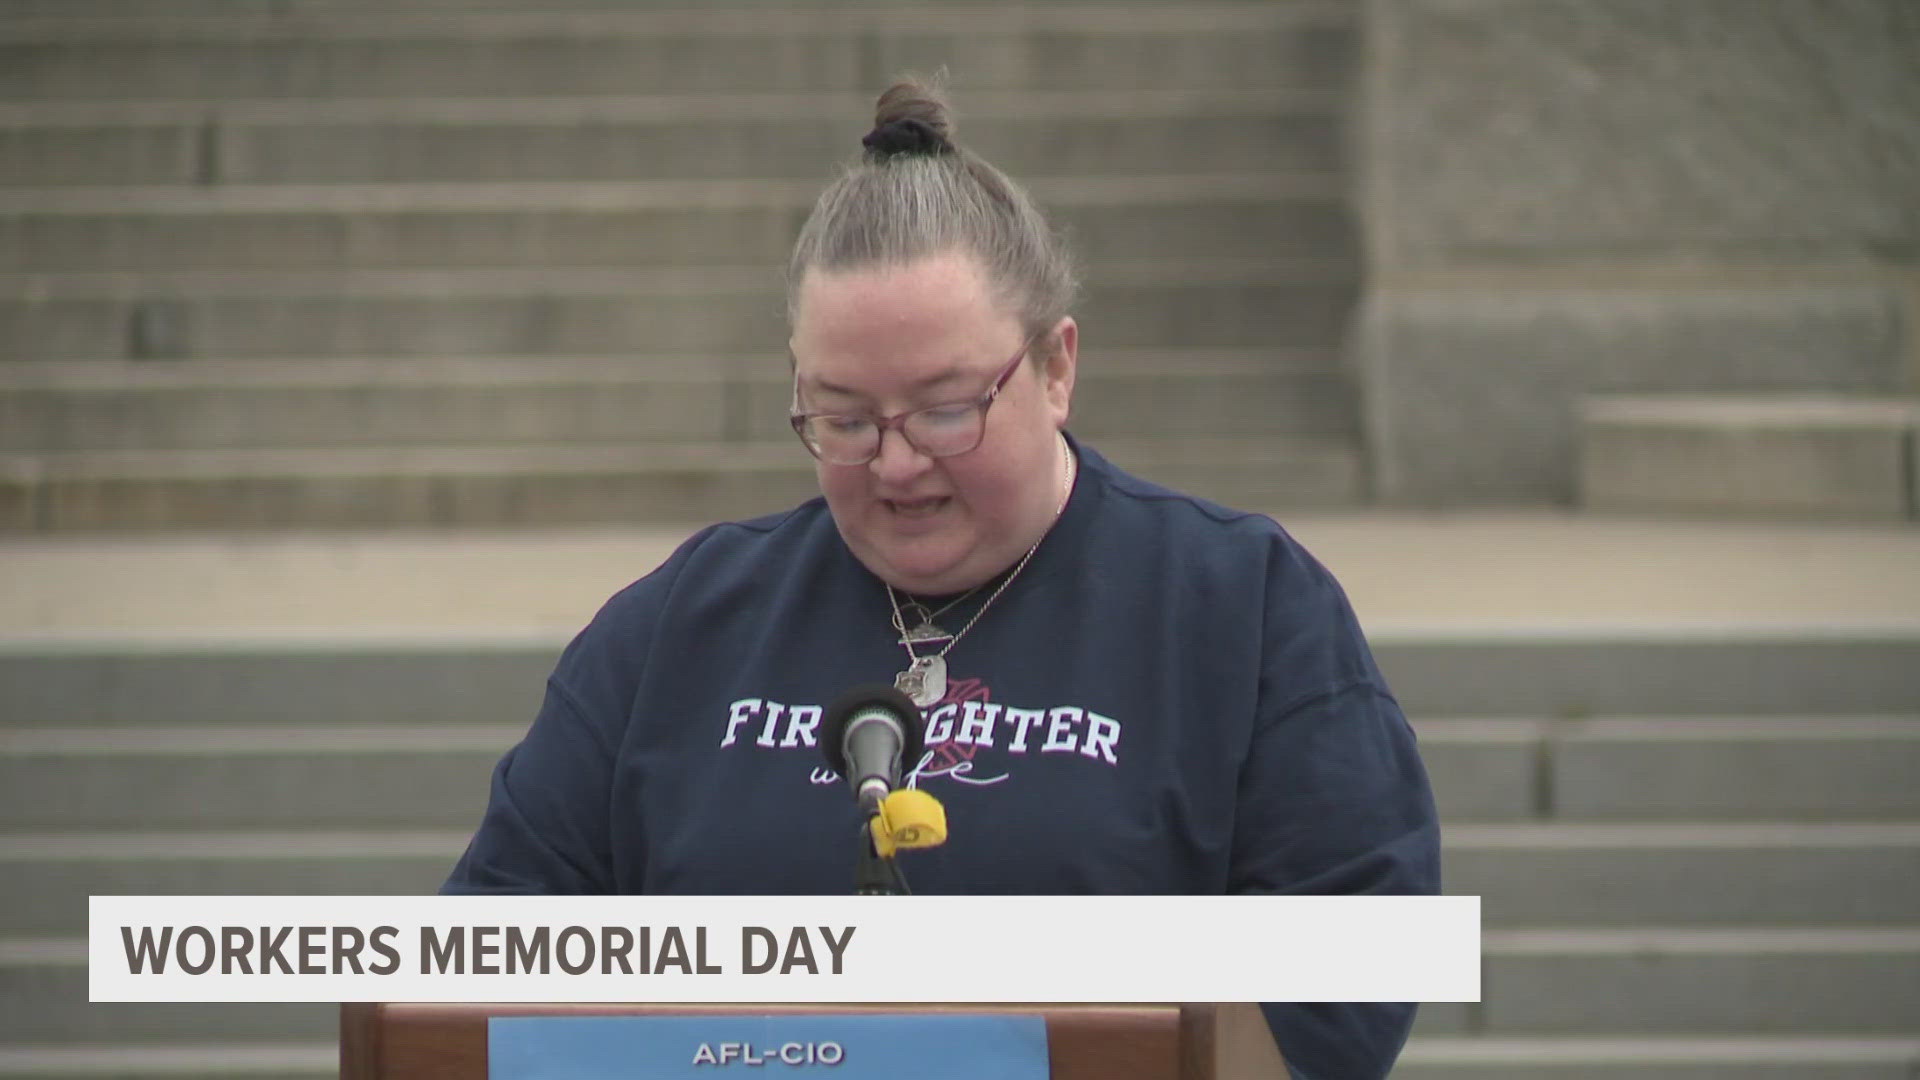 Labor unions gather to remember those who died on the job